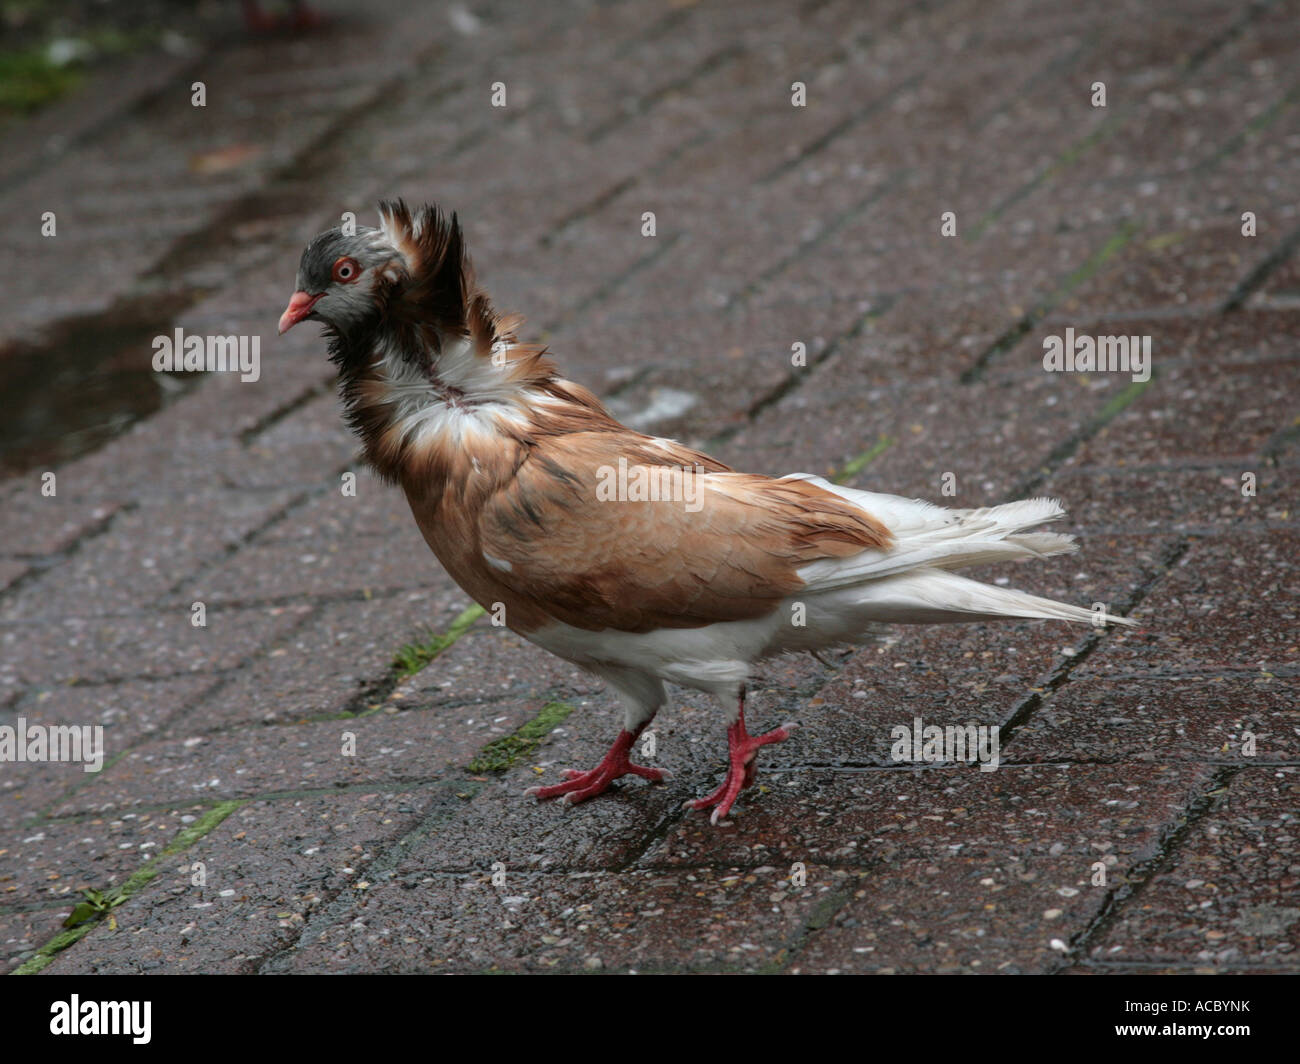 A fancy pigeon with a large ruff around the neck. Stock Photo